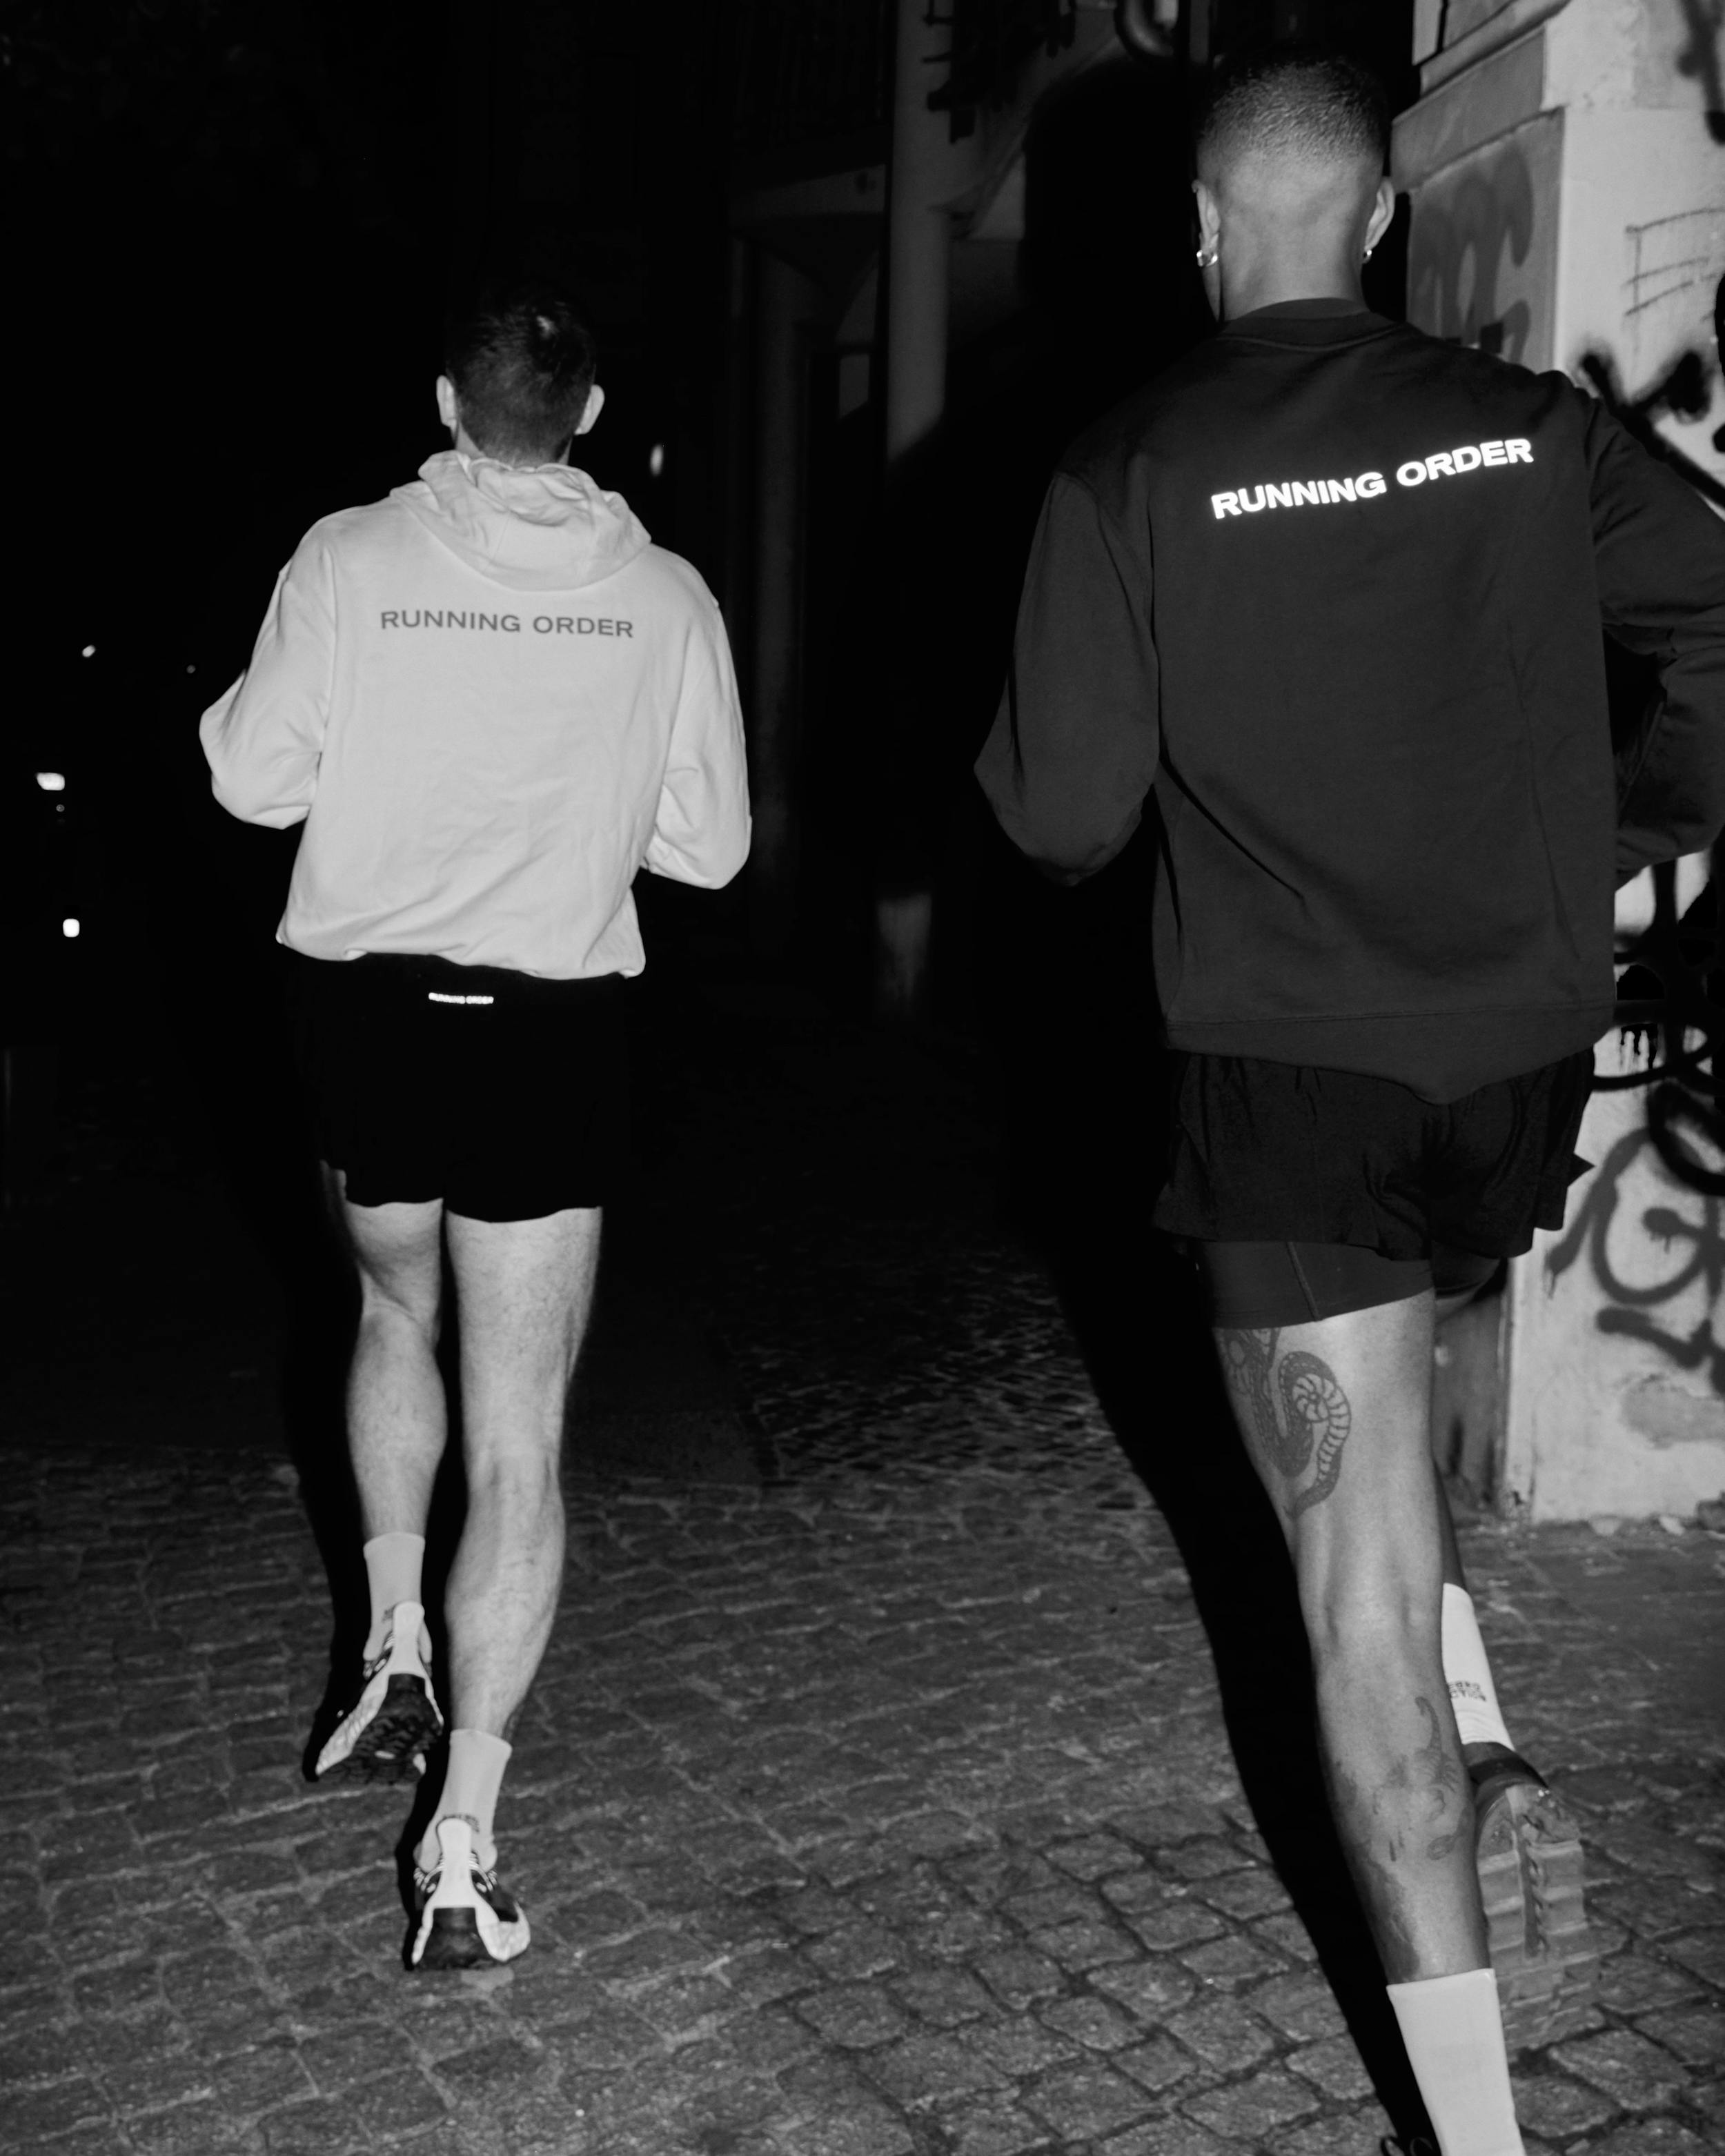 BERLIN NIGHT RUN - COLLECTION 02 - Photographed by Jack Hare